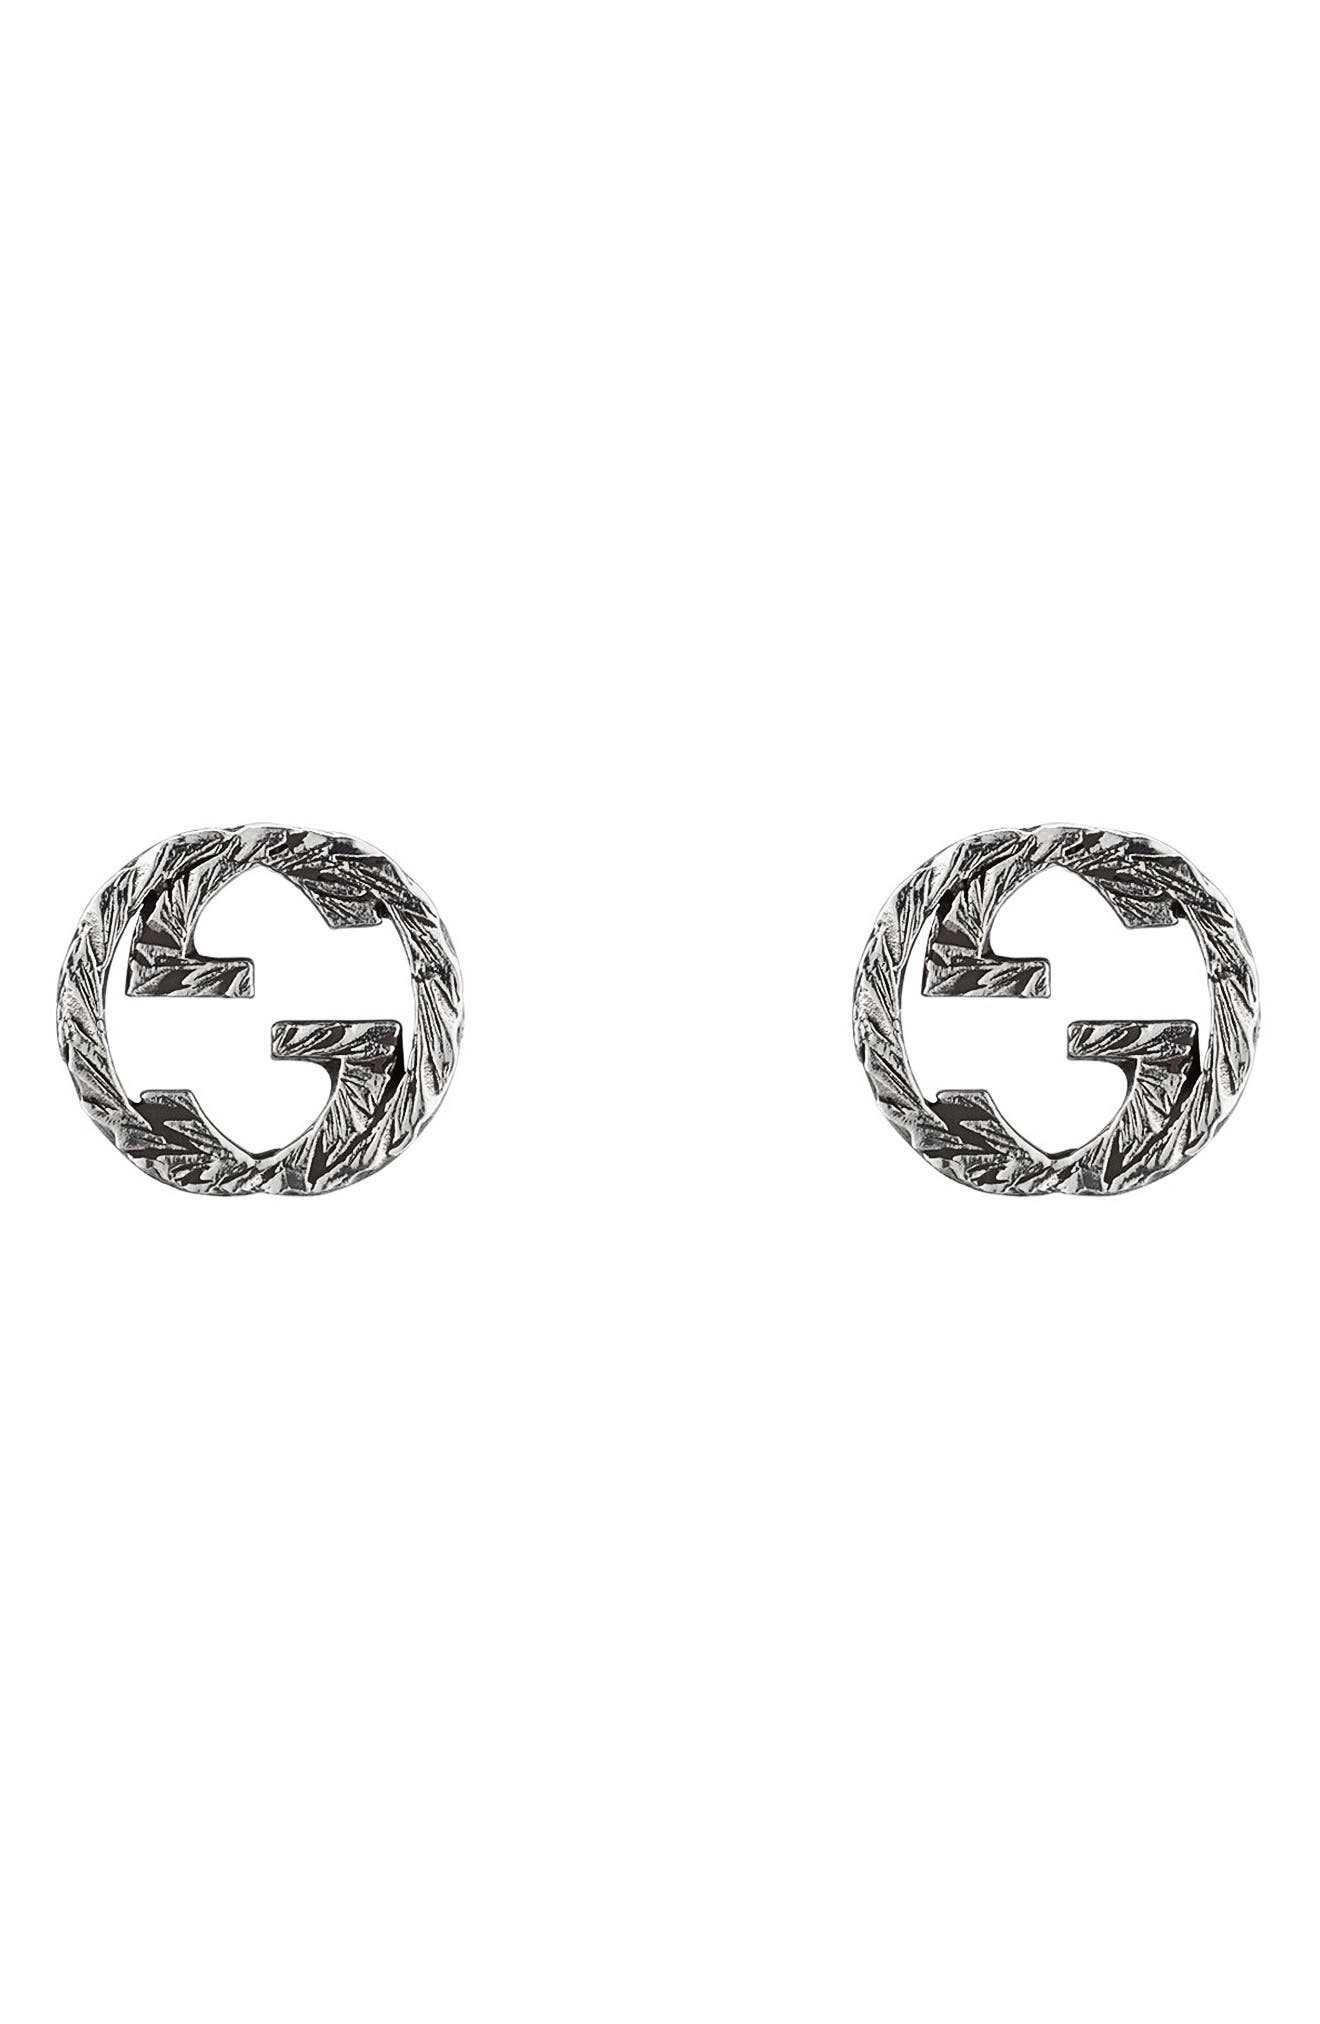 Gucci Interlocking G Silver Stud Earrings at Nordstrom